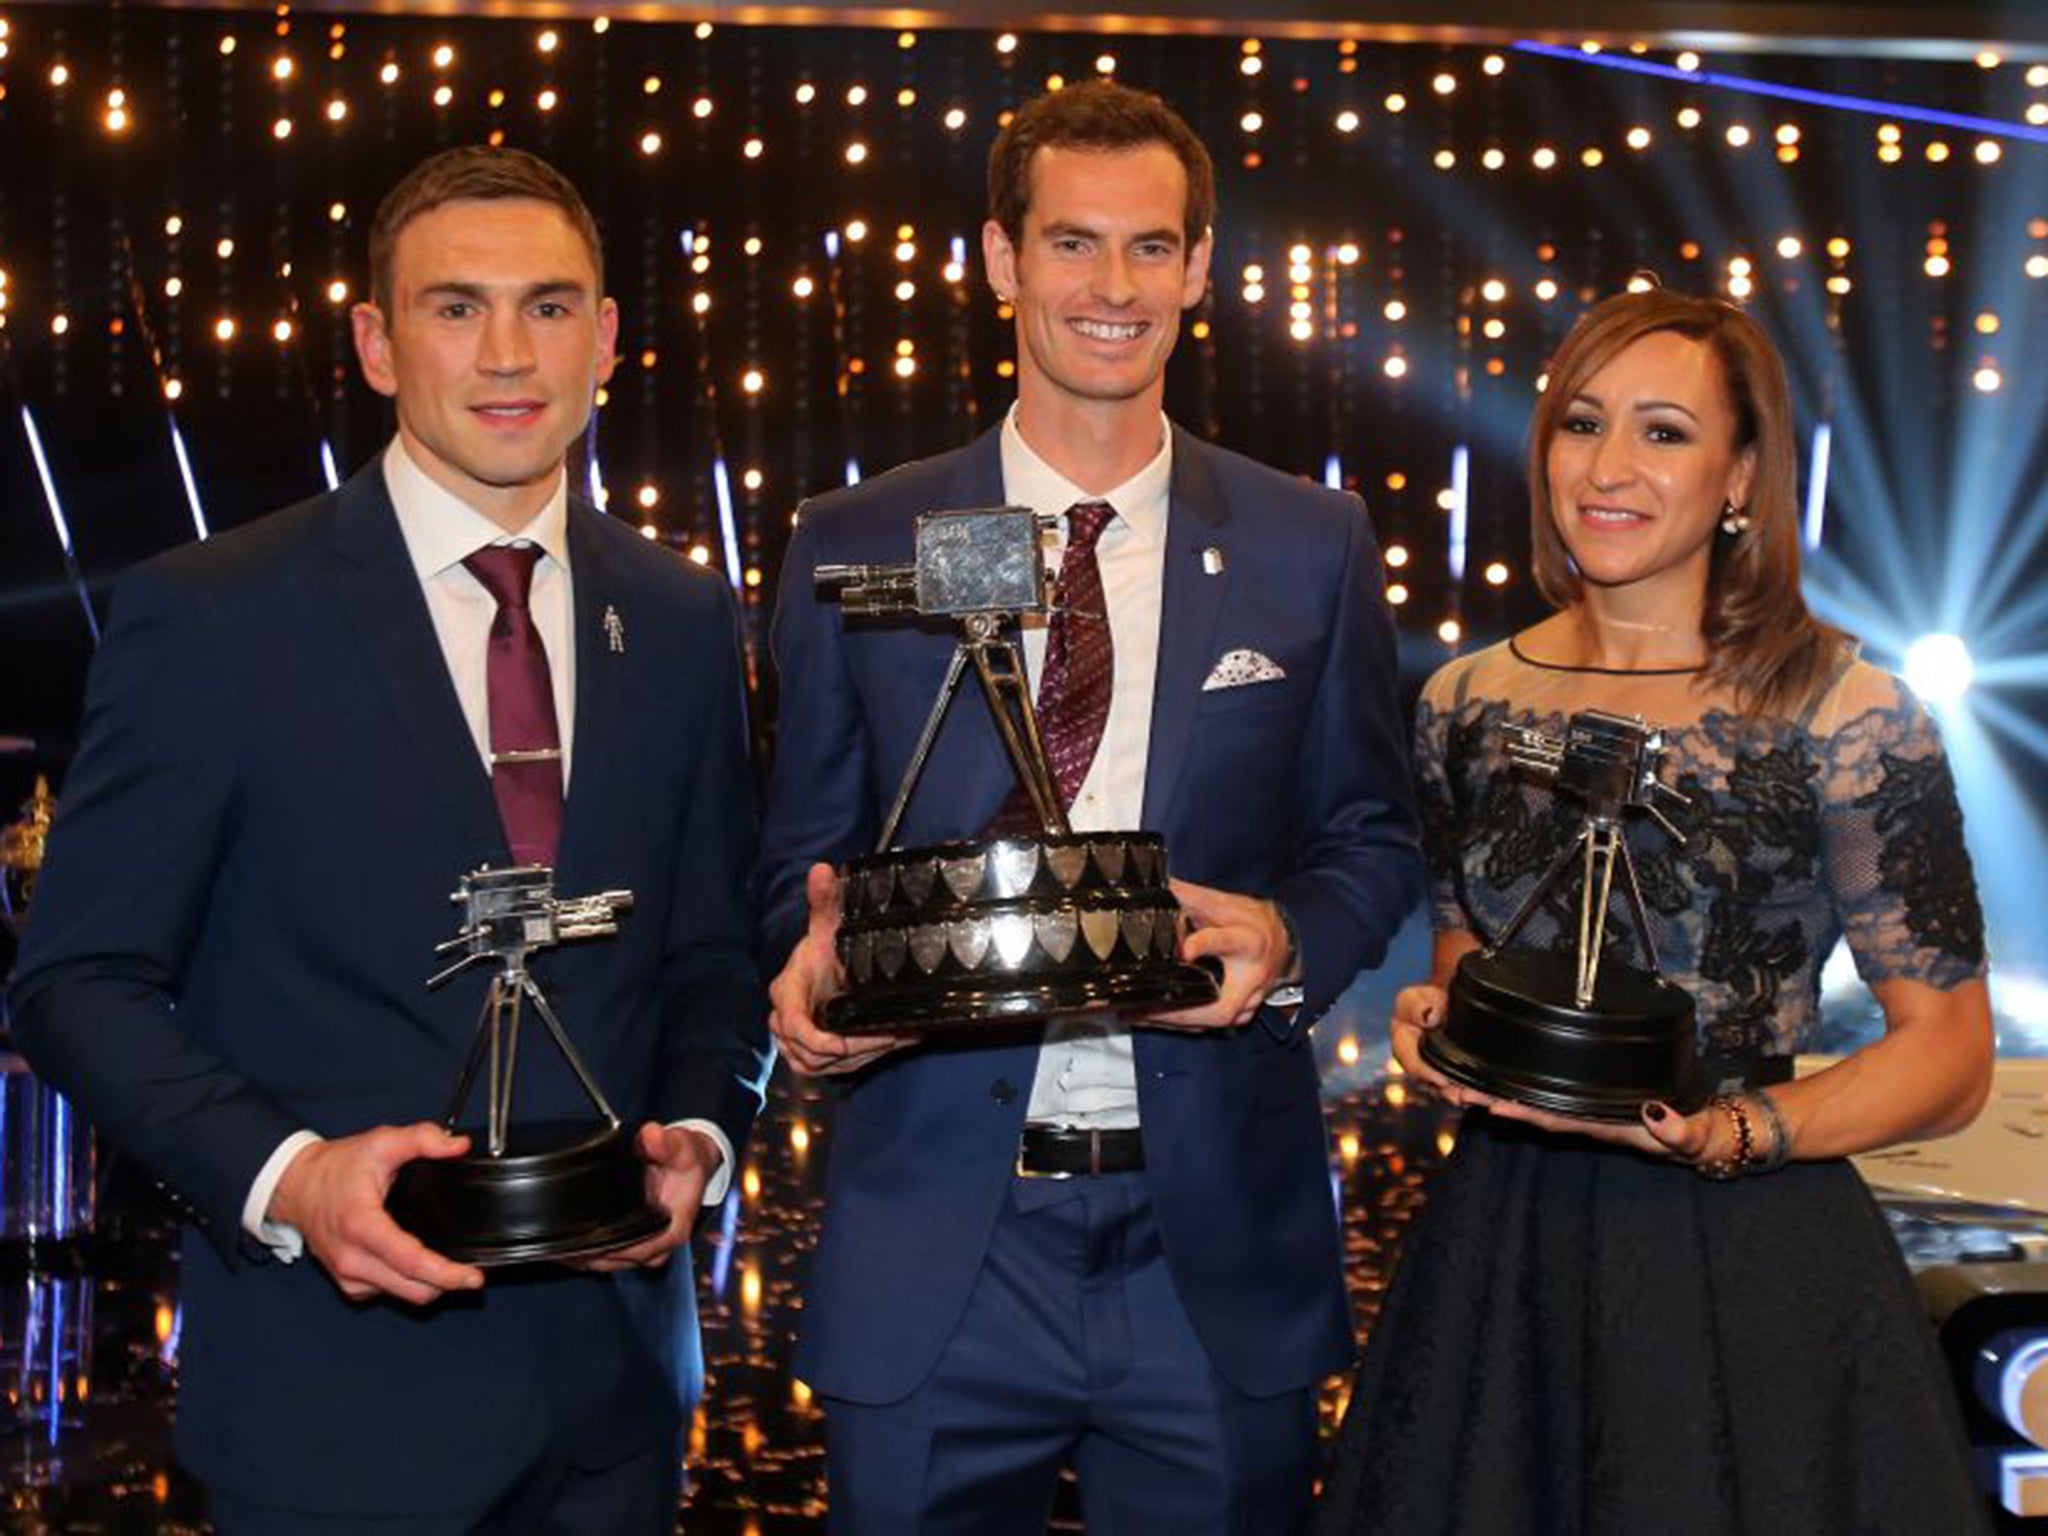 The top three of Kevin Sinfield (2), Andy Murray (1), and Jessica Ennis-Hill (3)